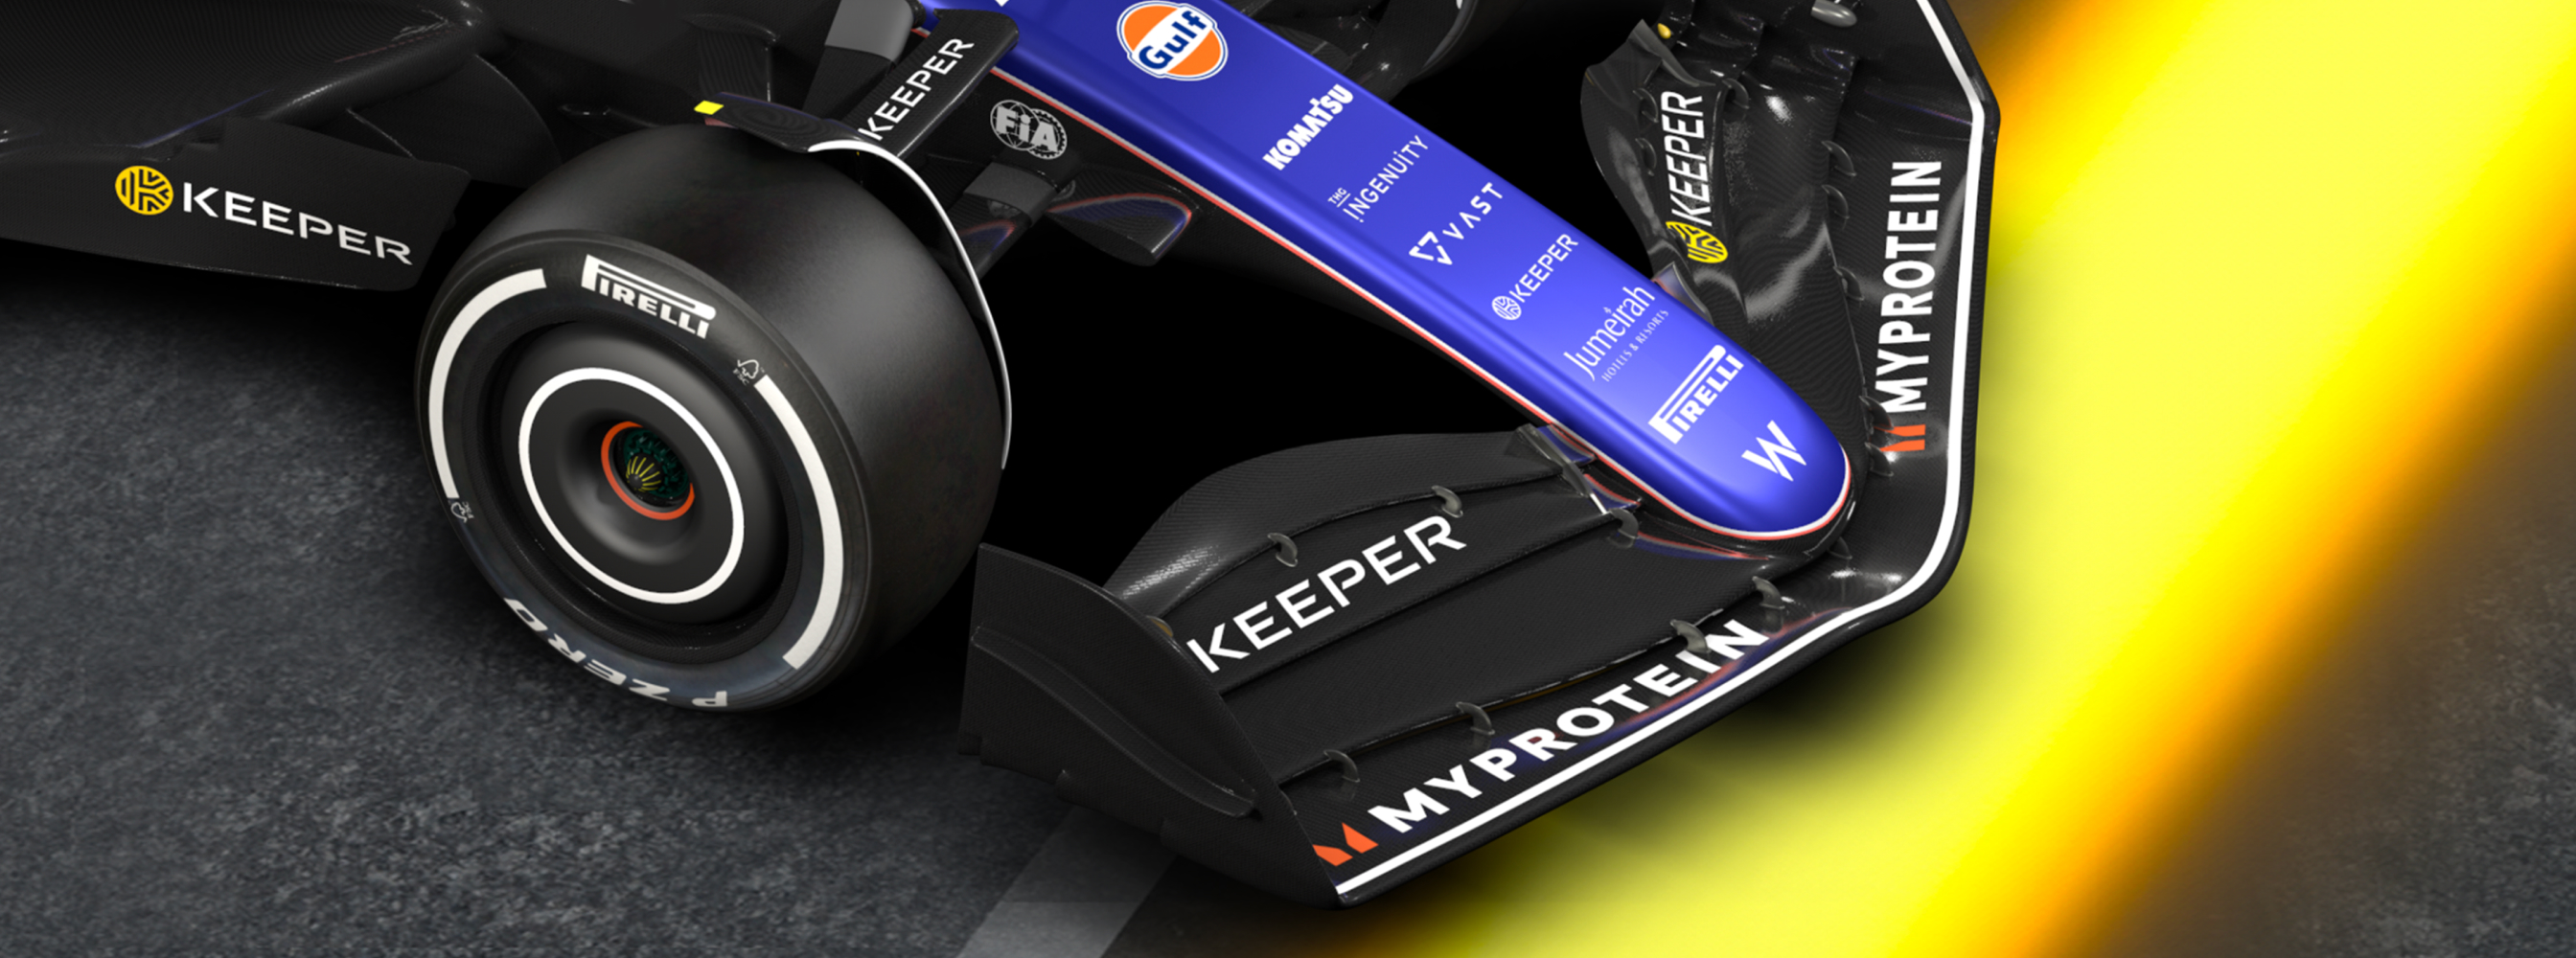 Keeper x Williams Racing - Accelerating Innovation